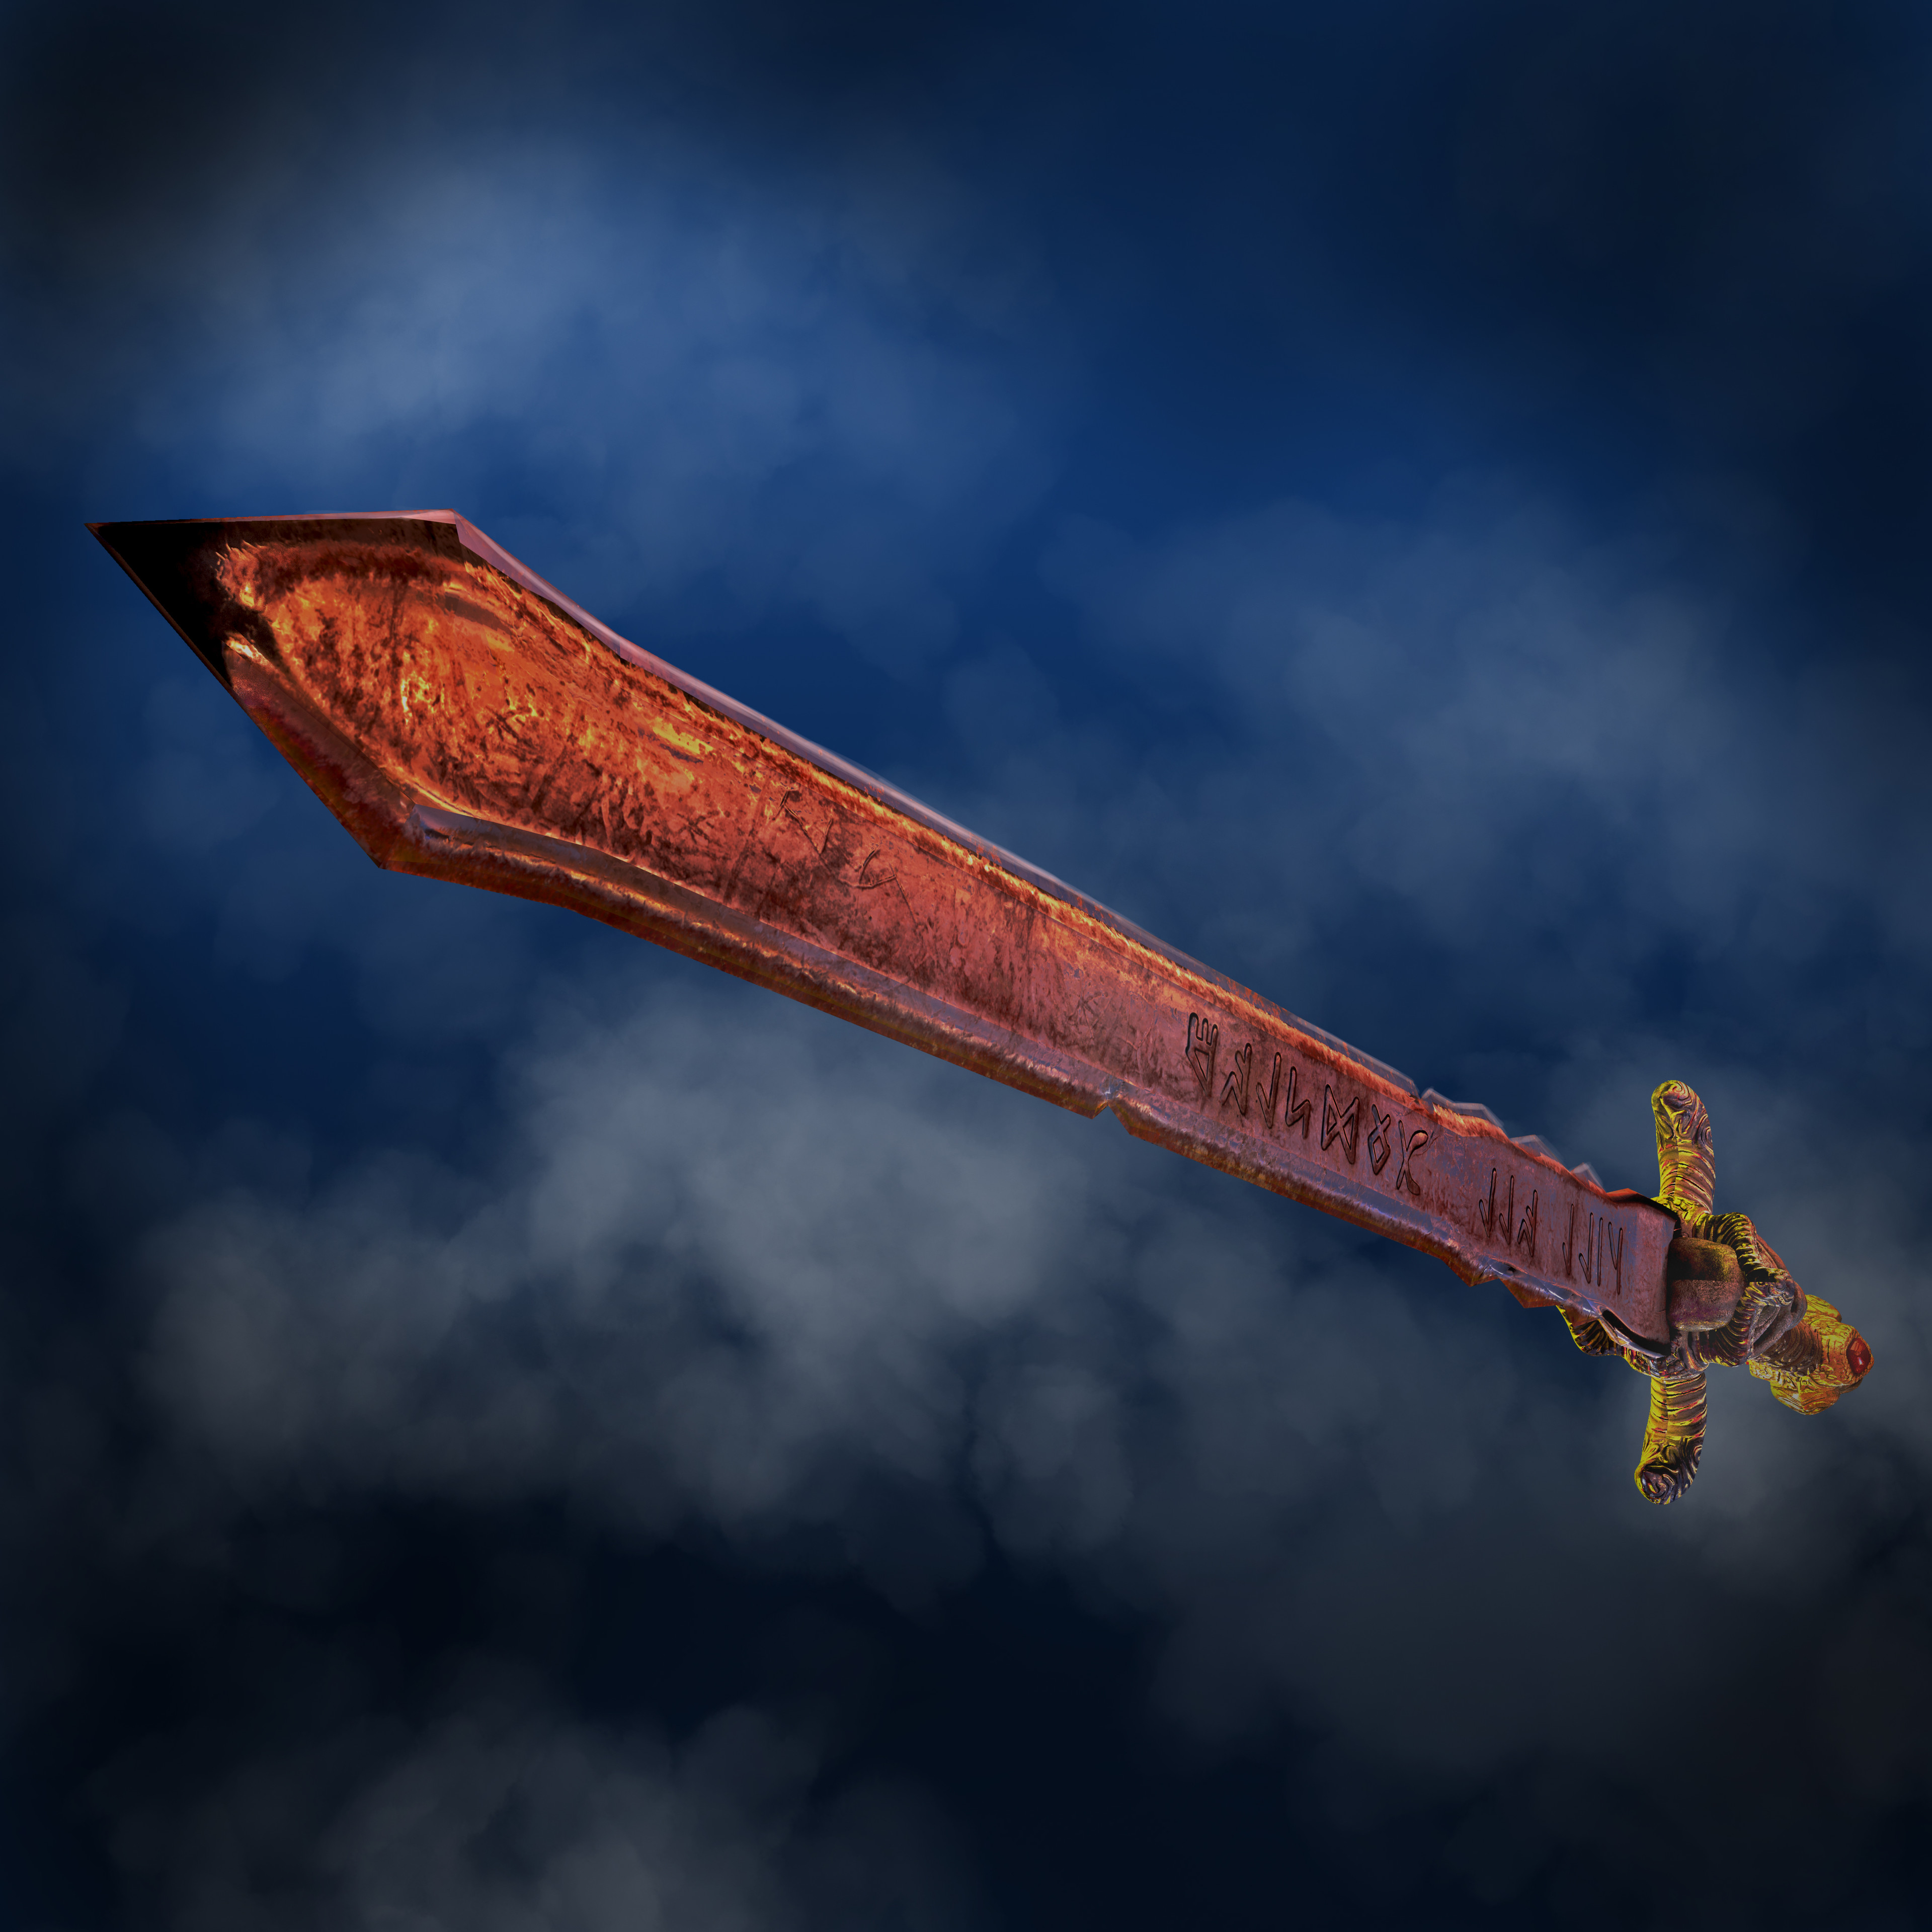 Been practising with Arnold renderer yesterday. Modelled this wee little low poly sword and textured it yesterday.